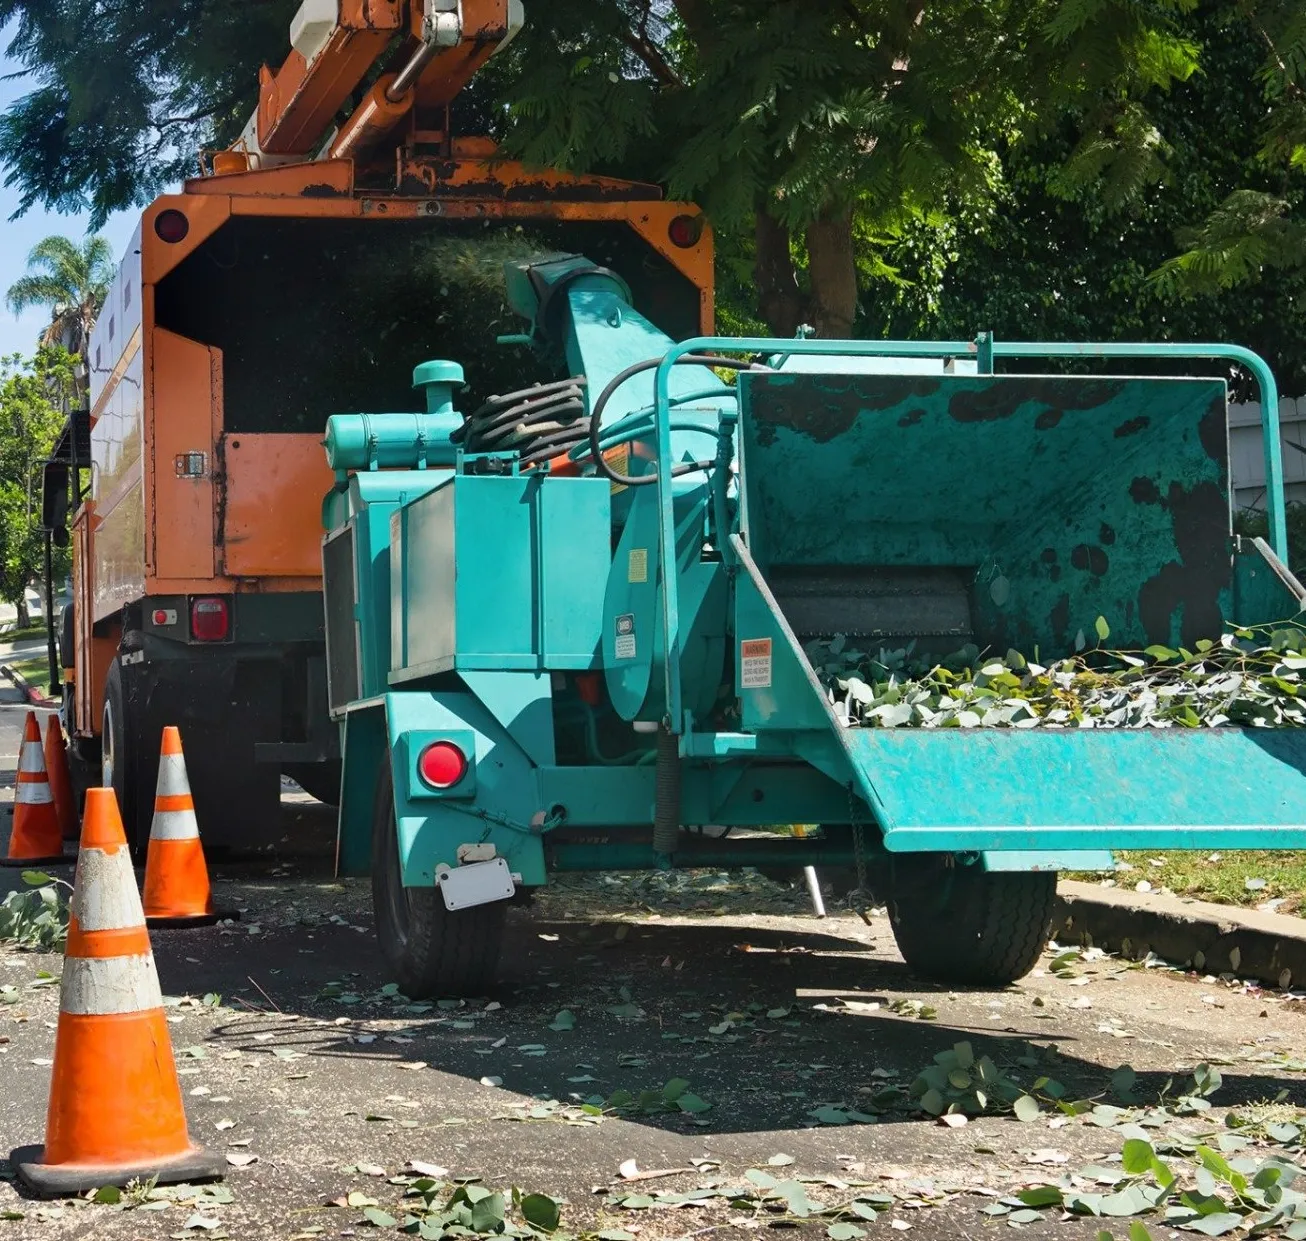 A tree trimming truck is parked next to a road in Boca Raton, with large green branches being fed into a wood chipper. Orange safety cones are placed around the work area. The scene is set beneath a leafy tree on a sunny day in Palm Beach County.